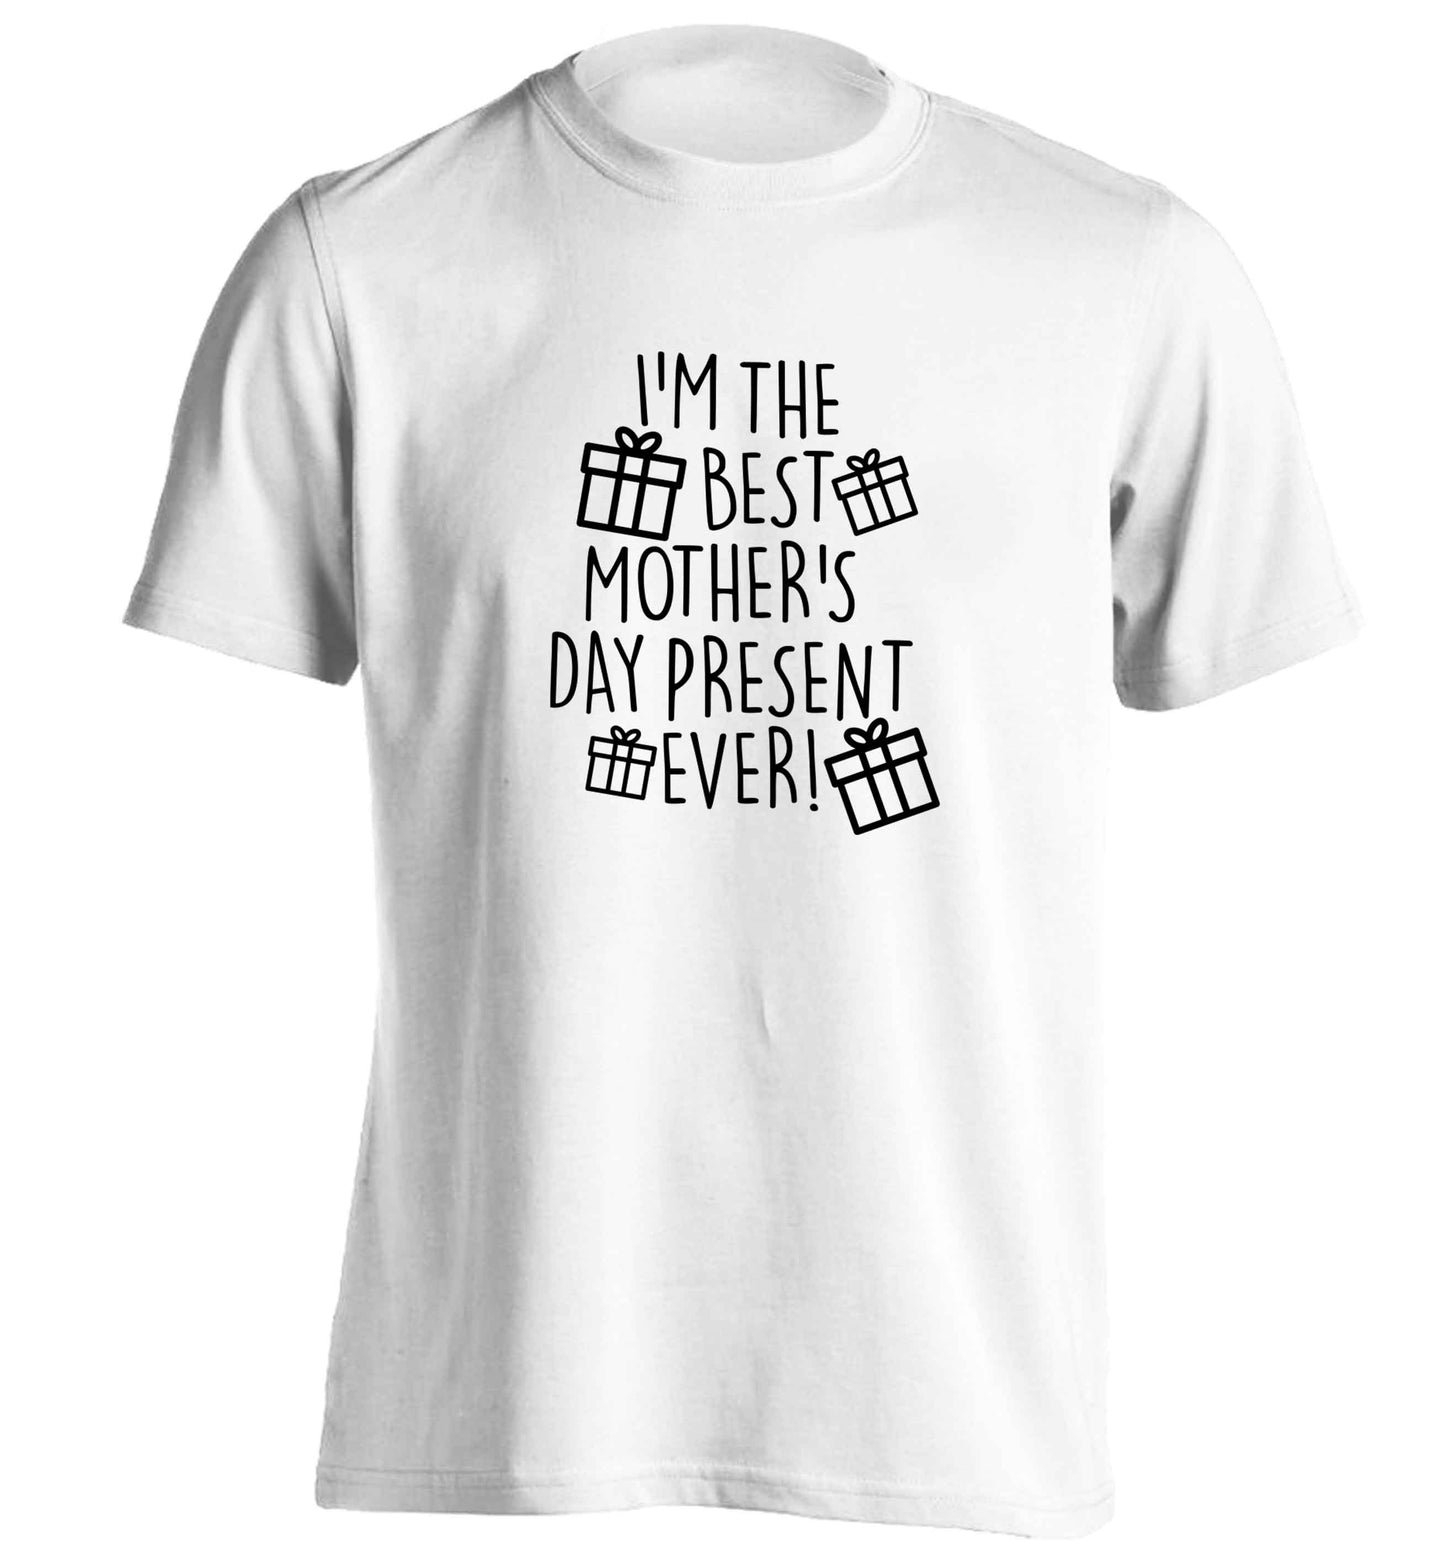 I'm the best mother's day present ever! adults unisex white Tshirt 2XL